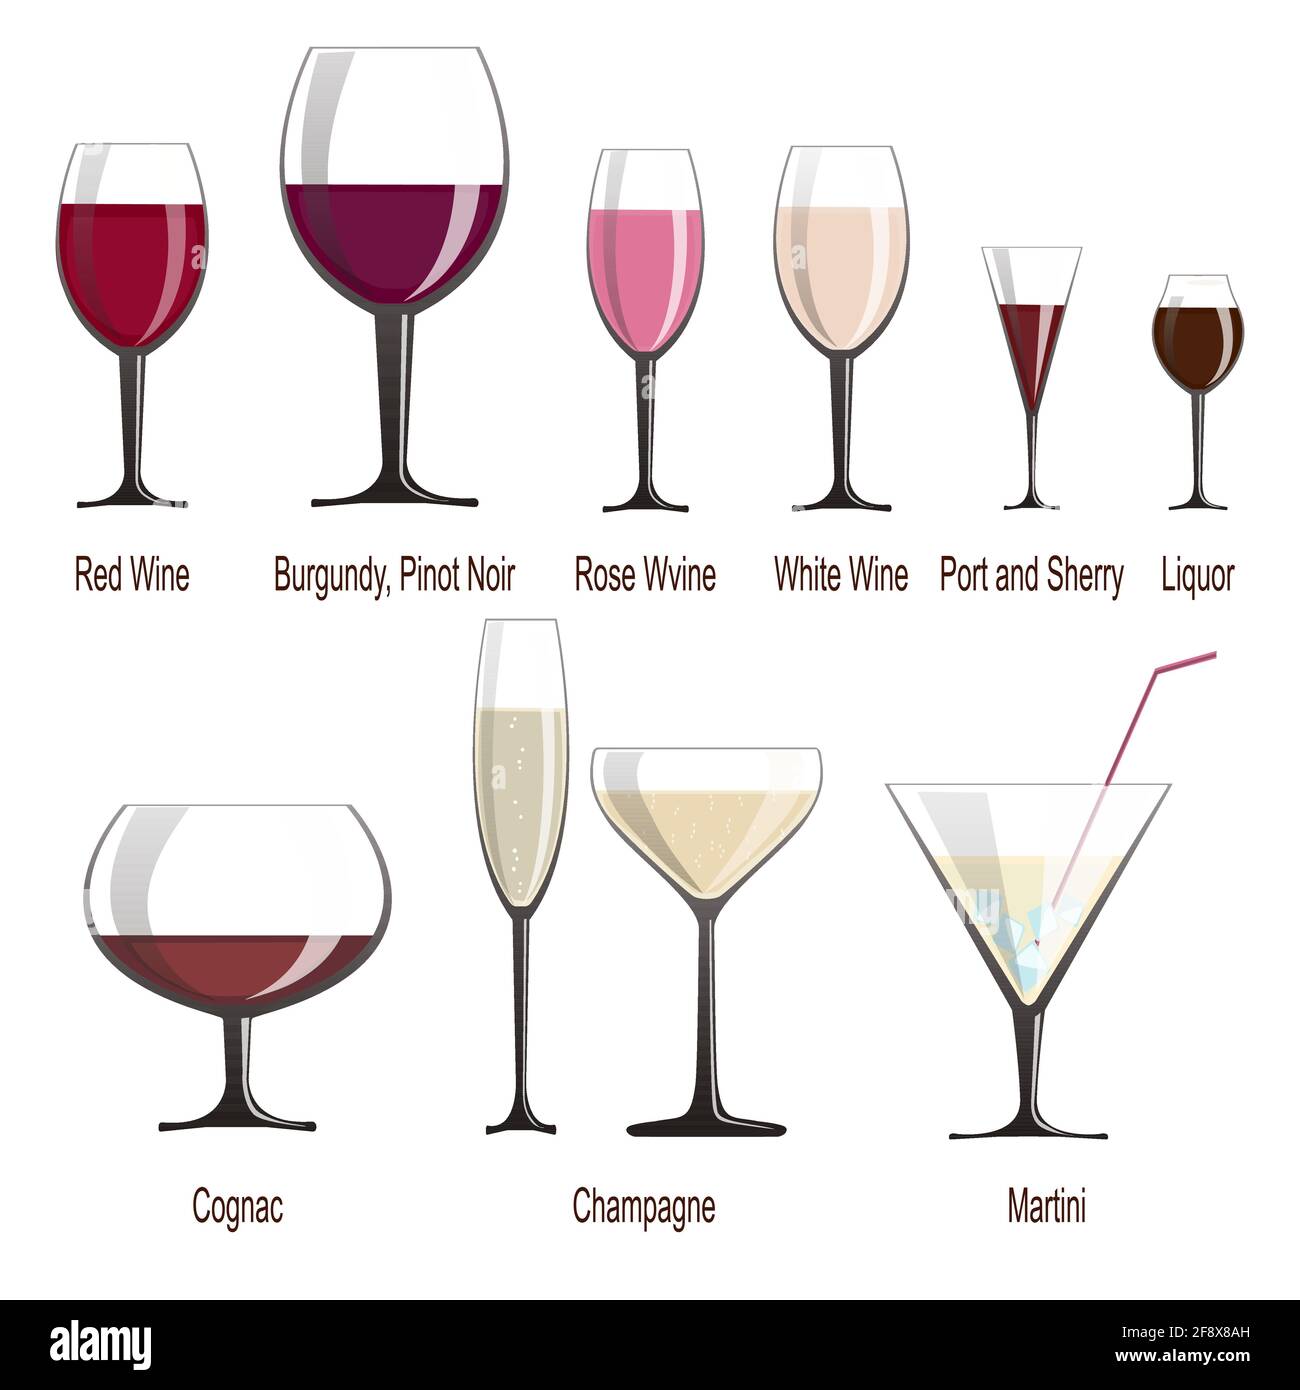 Names Of Different Types Of Drinking Glasses